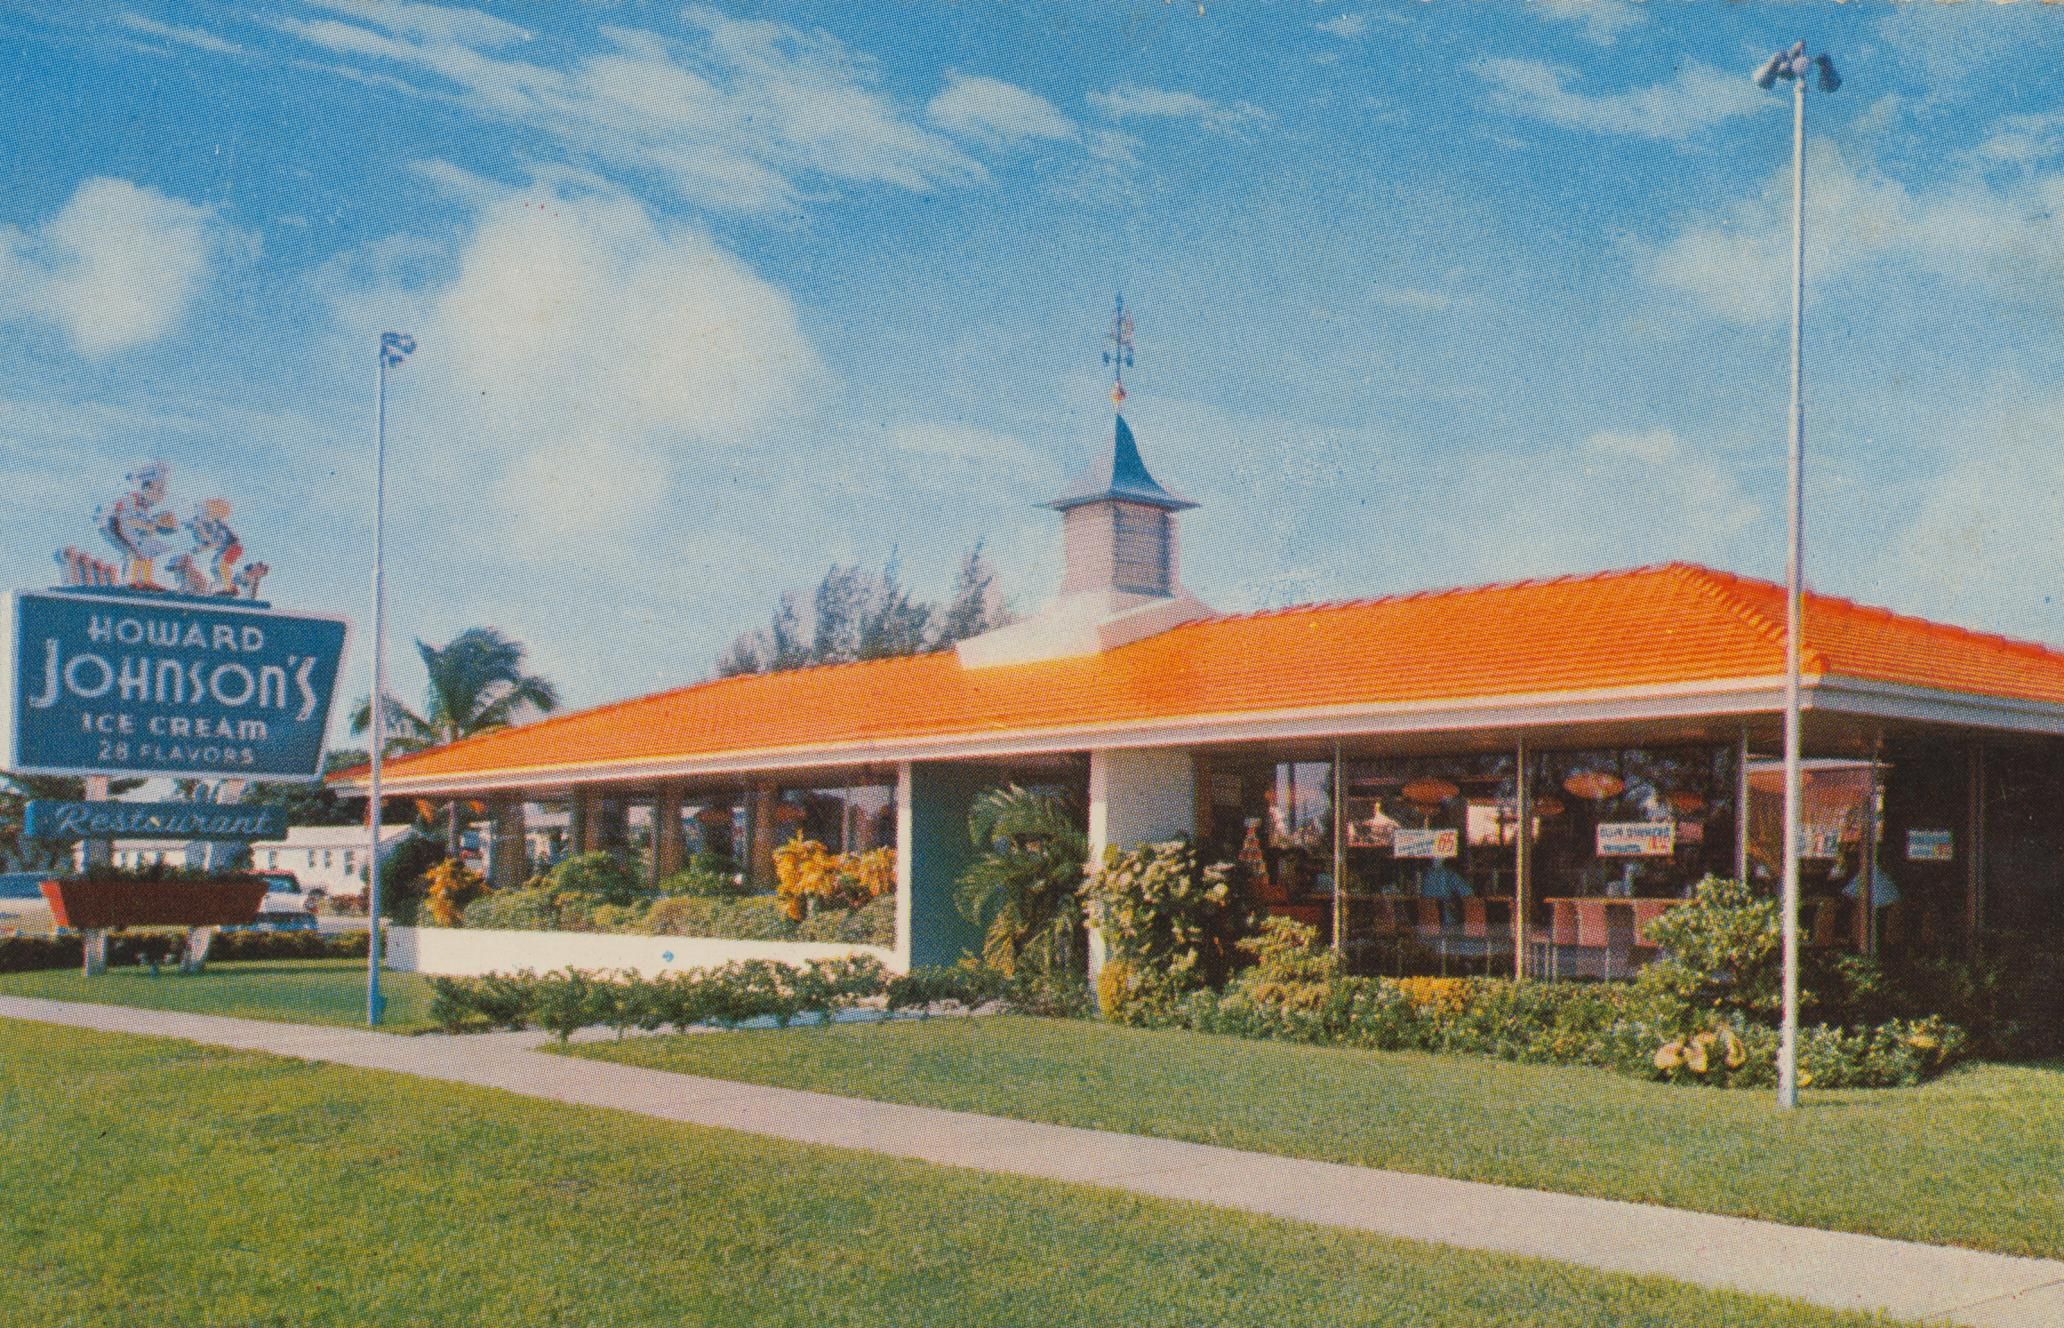 What were Howard Johnson's 28 flavors?